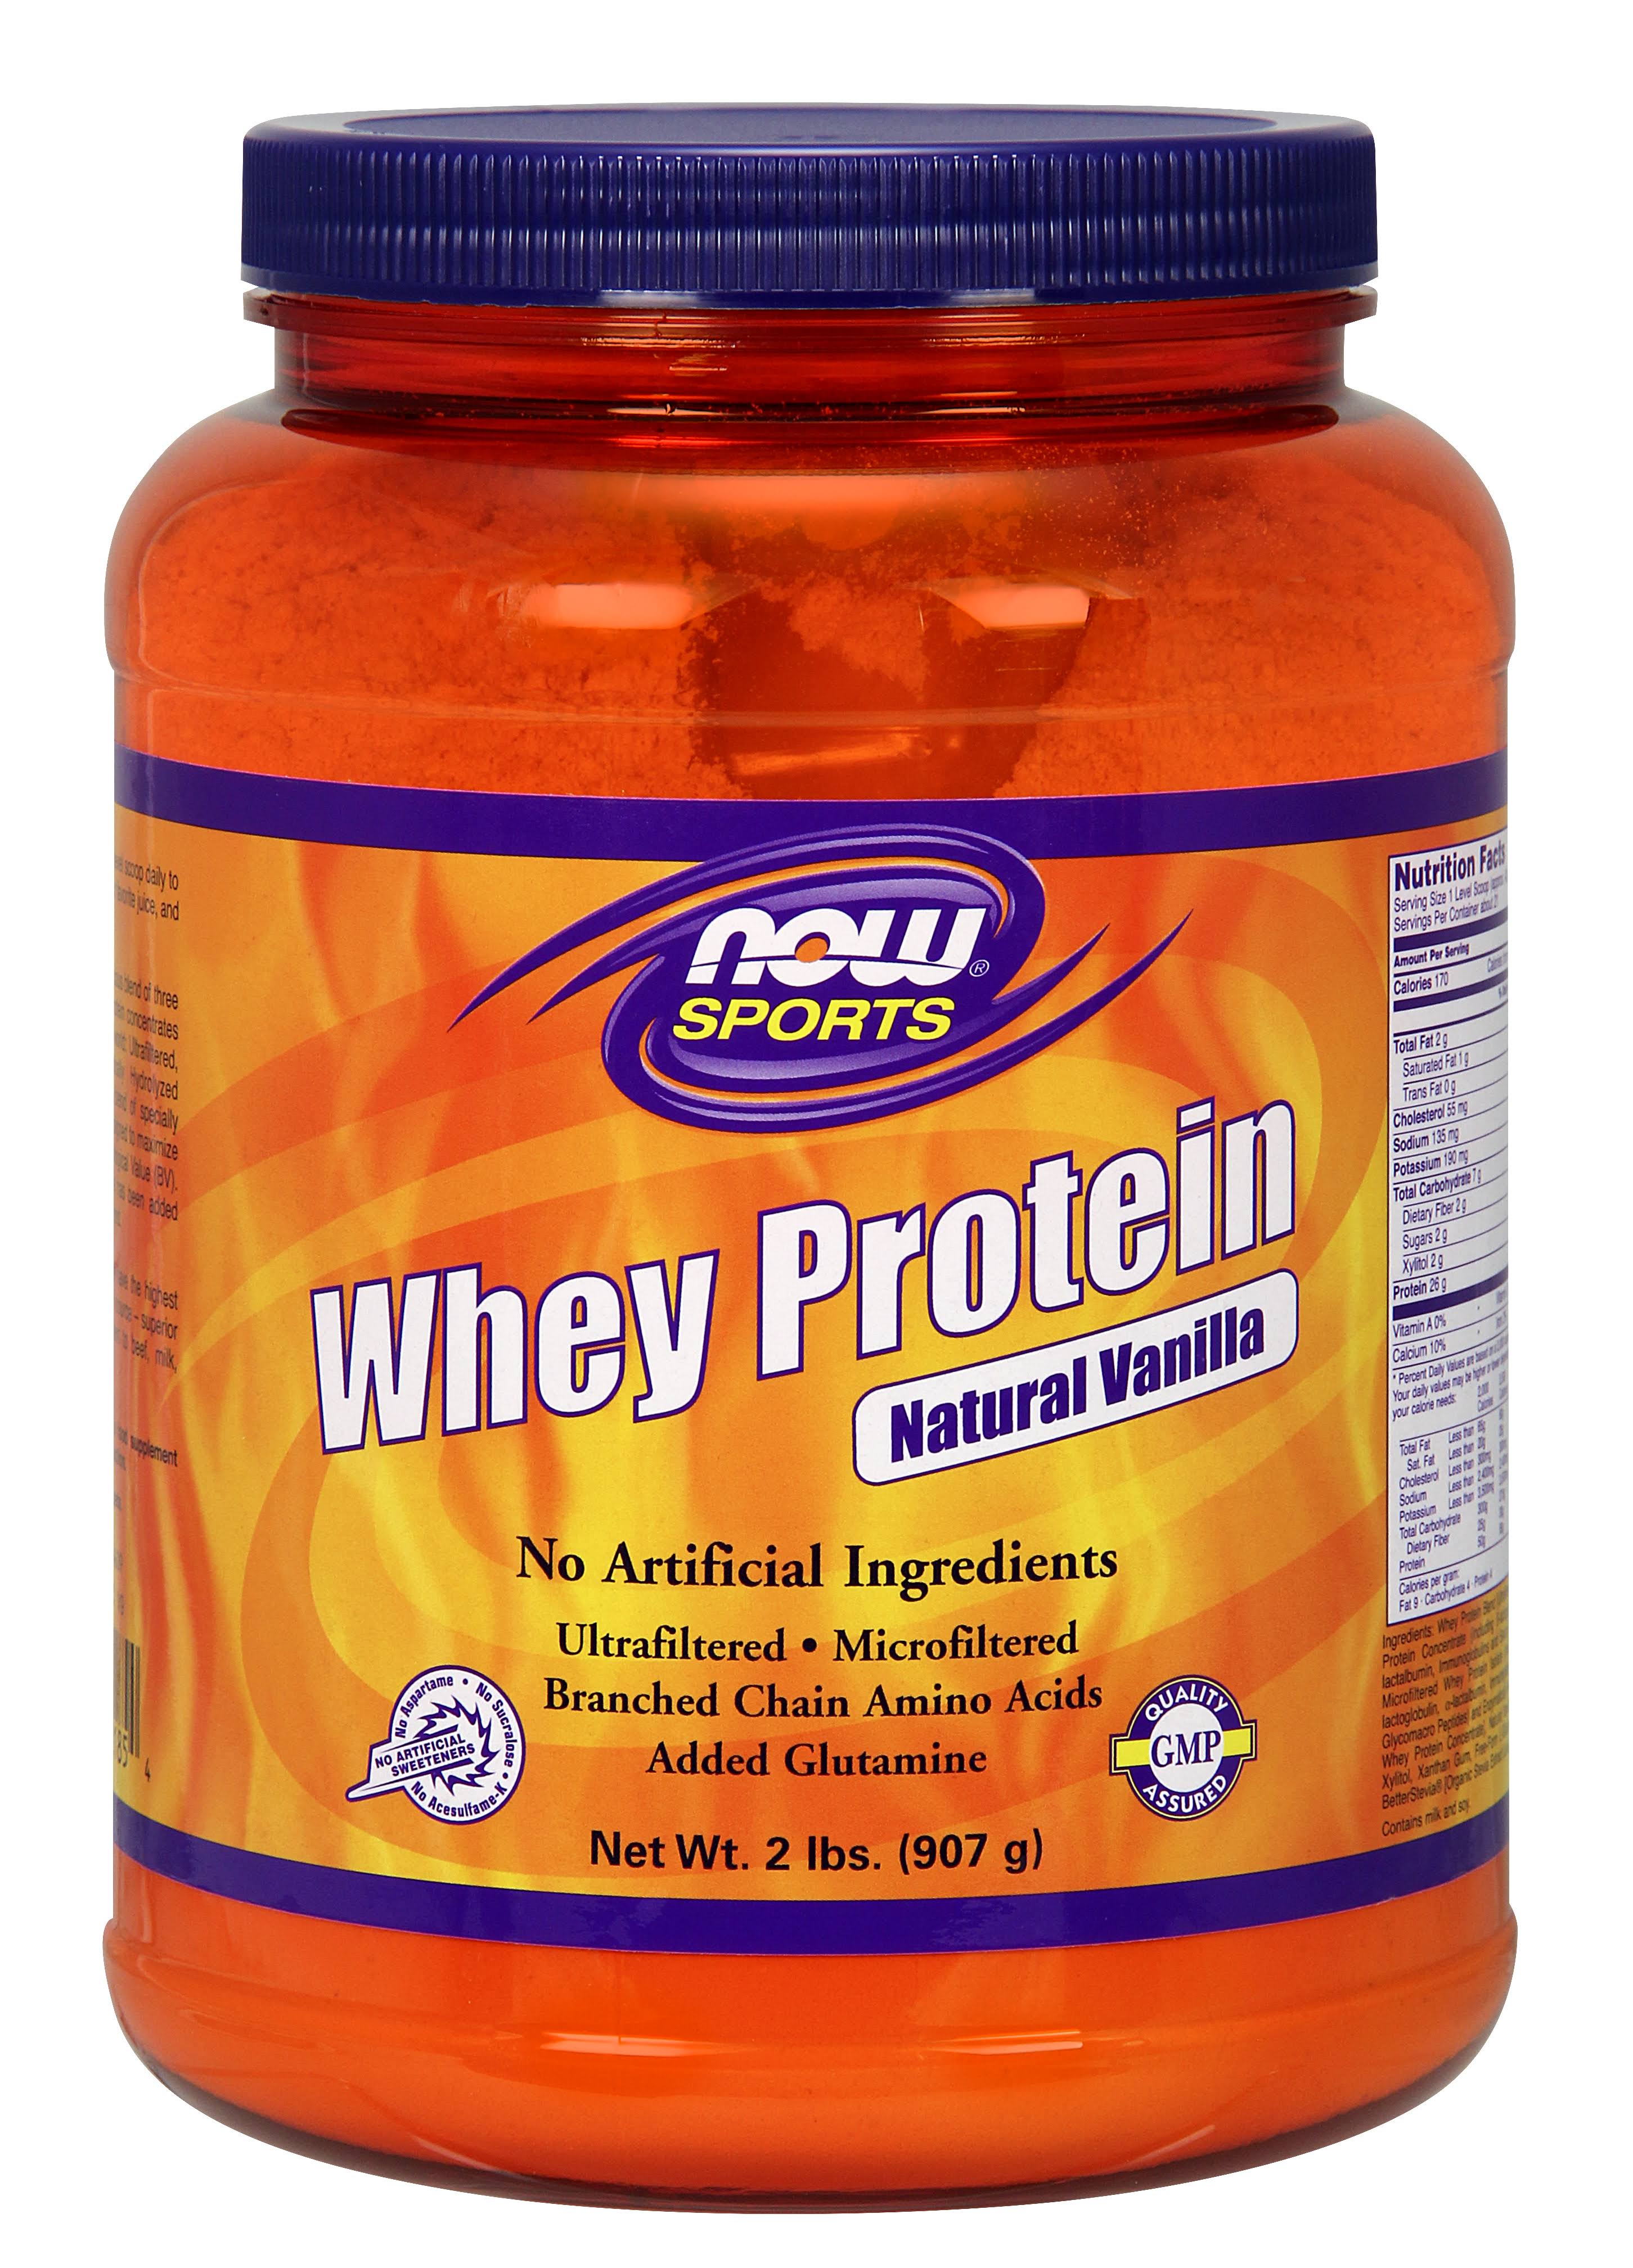 Now Sports Whey Protein - Natural Vanilla, 907g